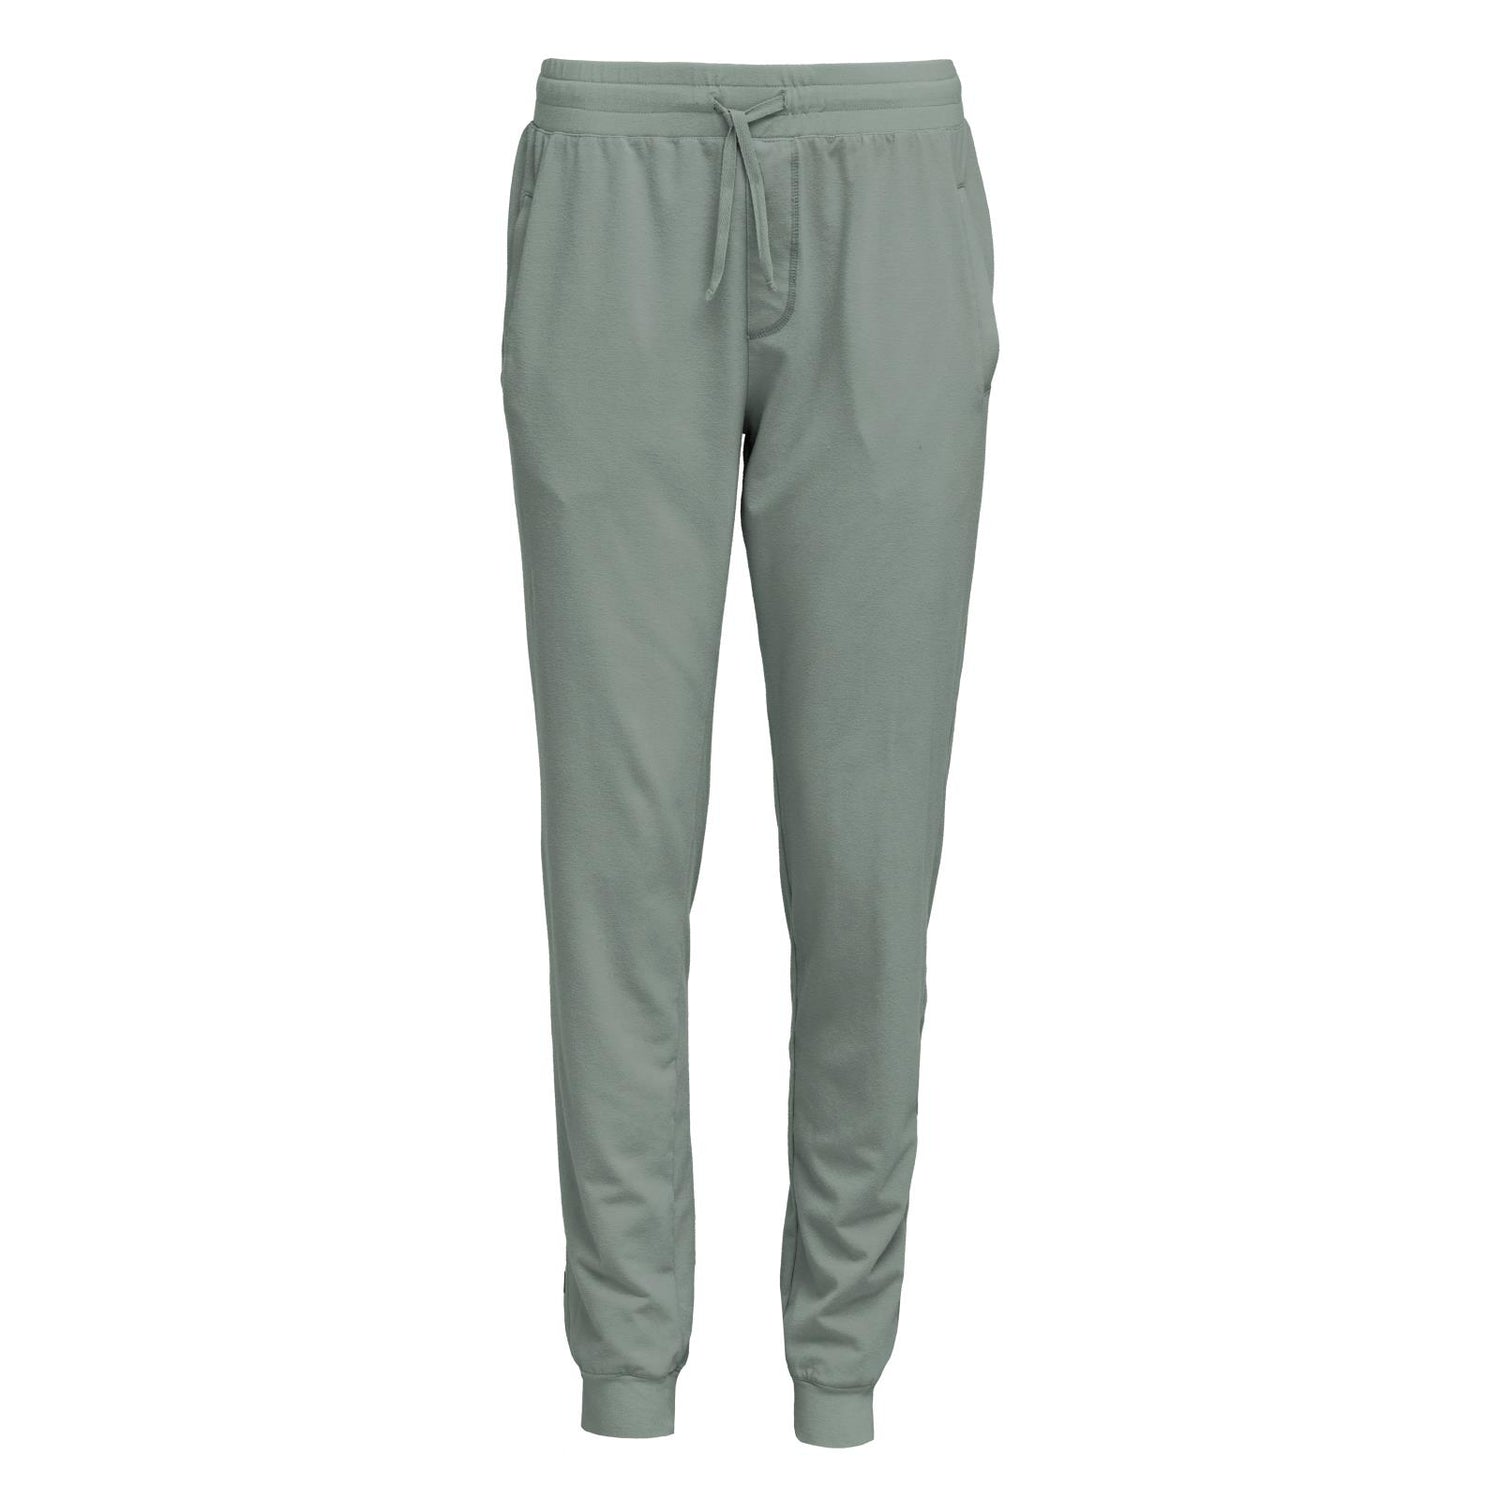 Women's Solid Luxe Athletic Joggers in Lily Pad